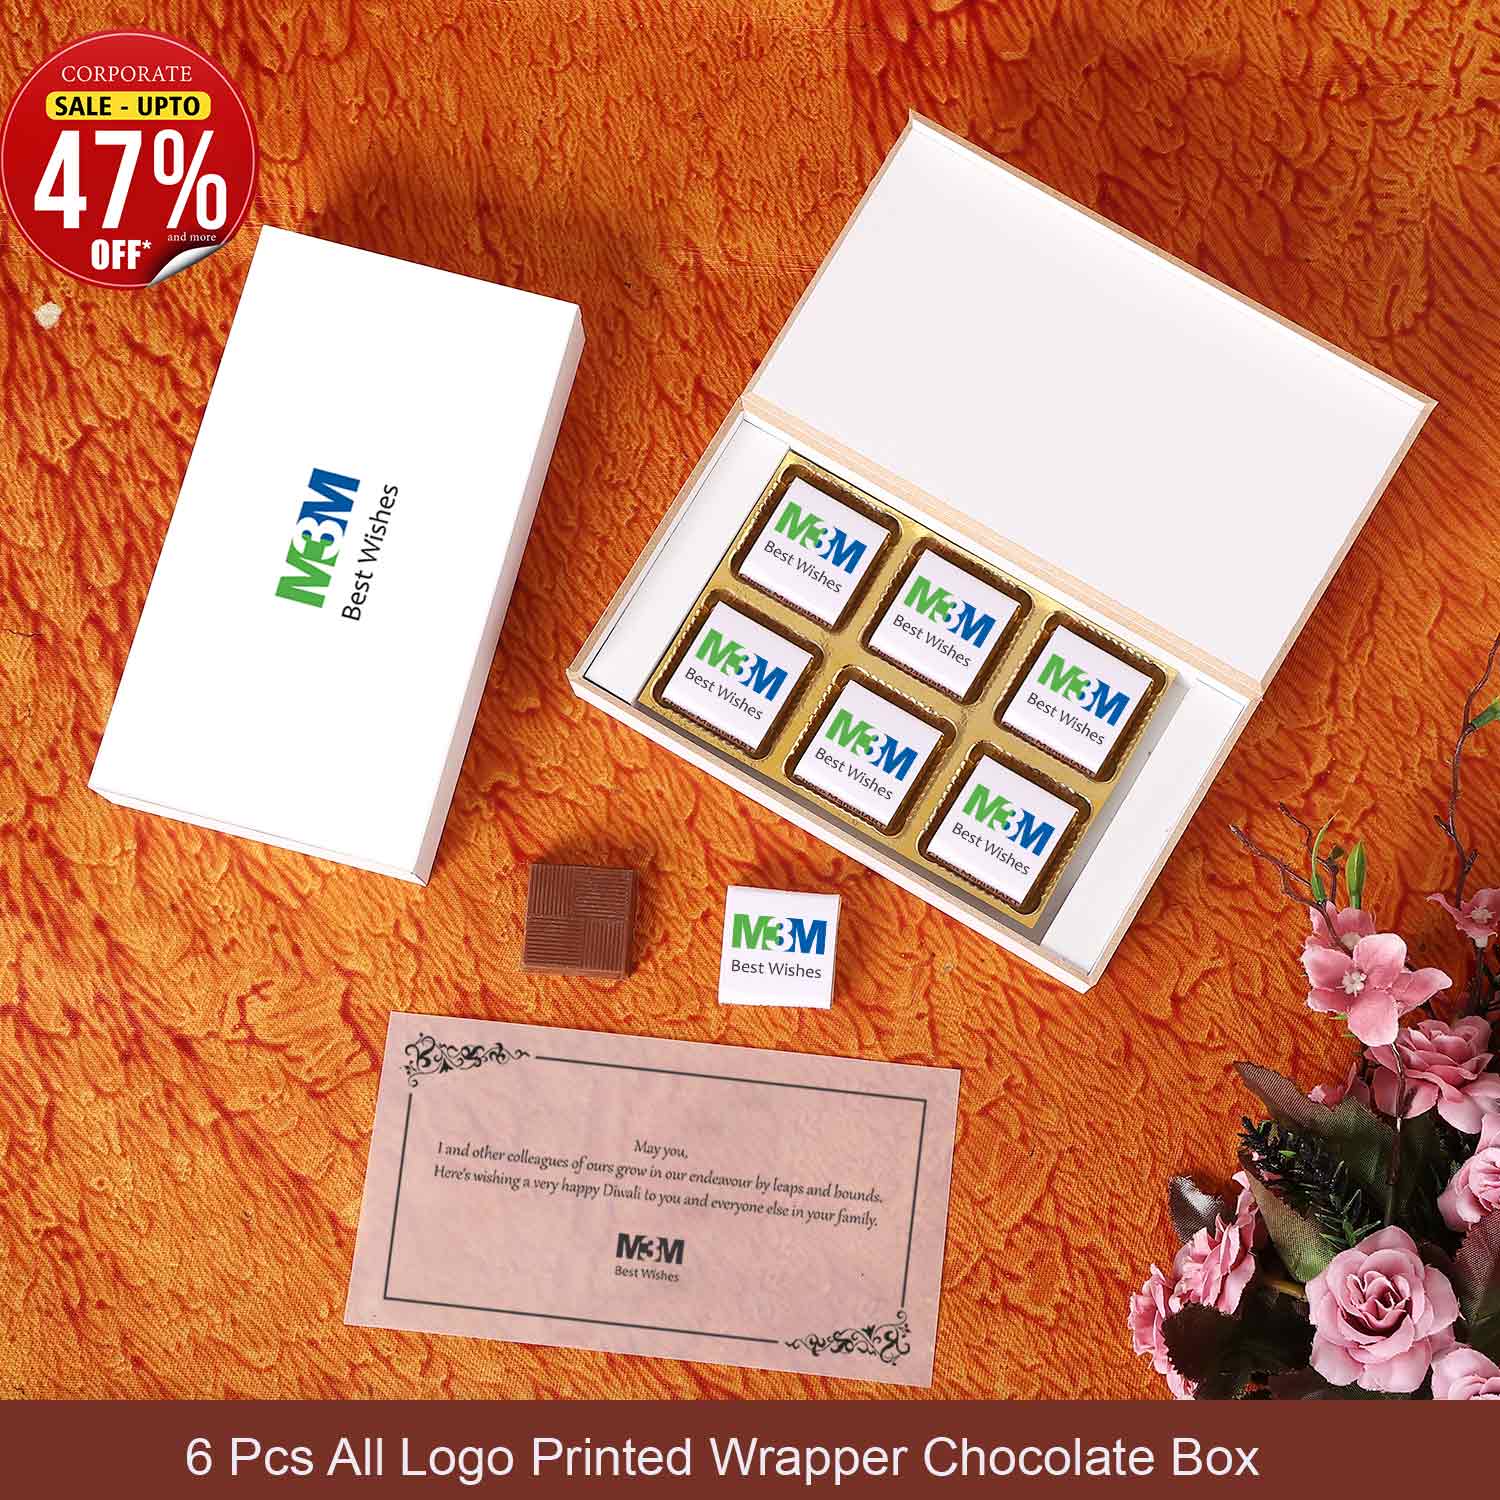  Corporate Chocolate Gifts corporateevents  promotion  promotionalproducts  promotionalmerchandise  events  eventmanagement  eventmarketing  eventagency  brandbuilding  brandpromotion